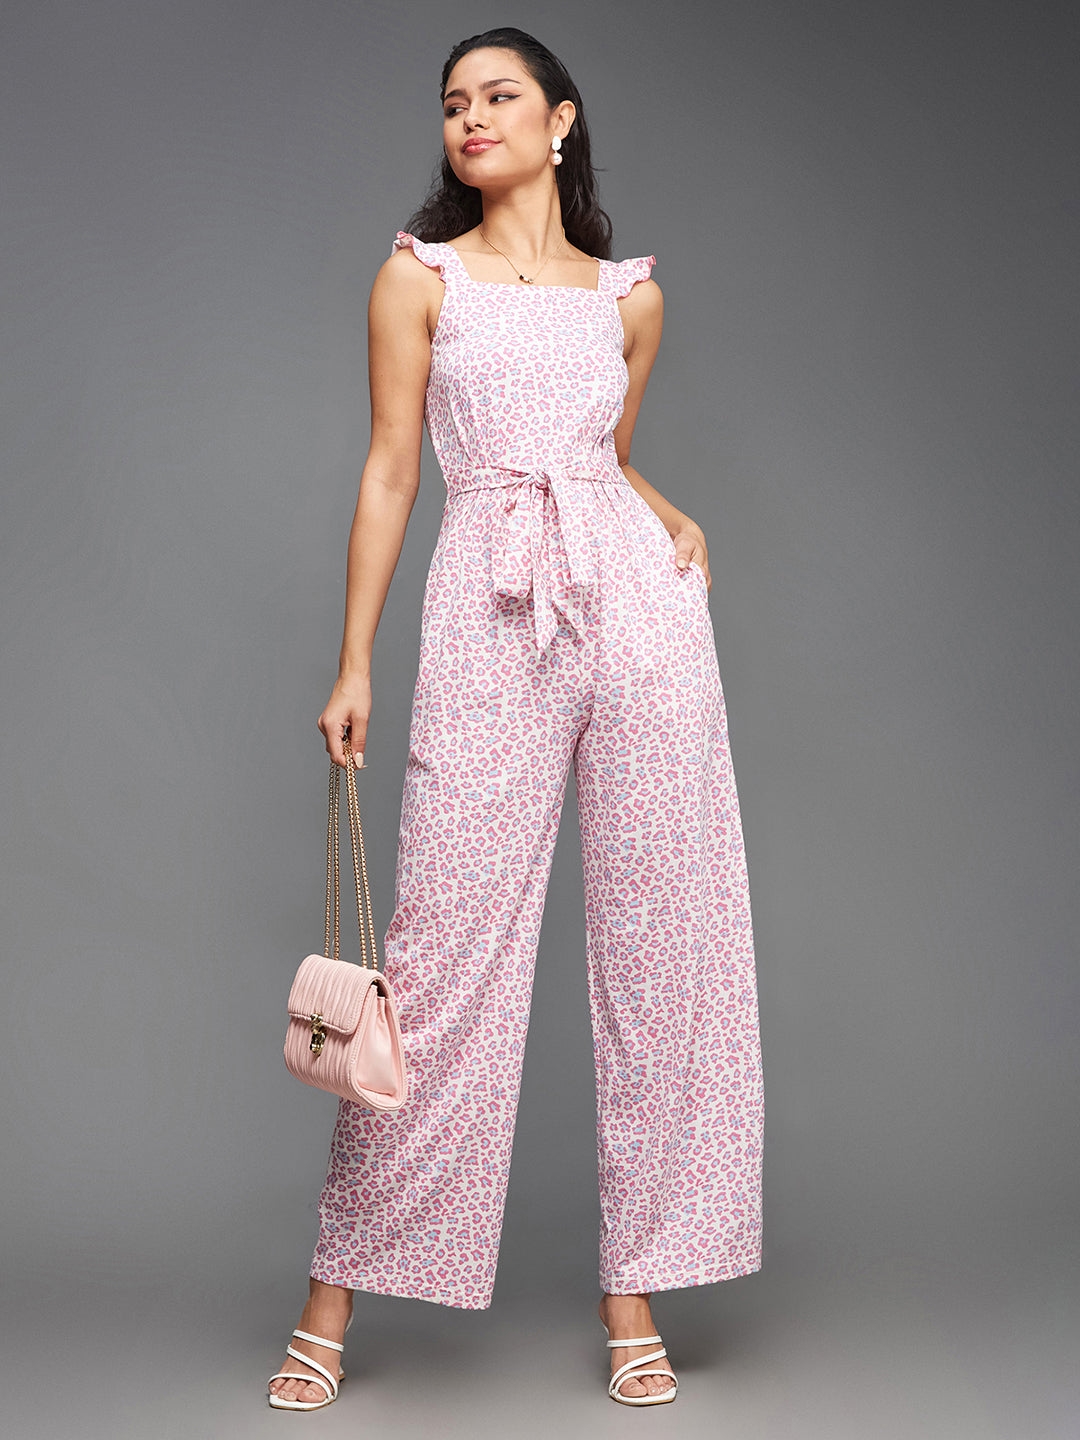 MISS CHASE | Multicolored-Base-Peach Square Neck Sleeveless Animal-Patterned Waist Tie-Up Pure Cotton Regular-Length Jumpsuit